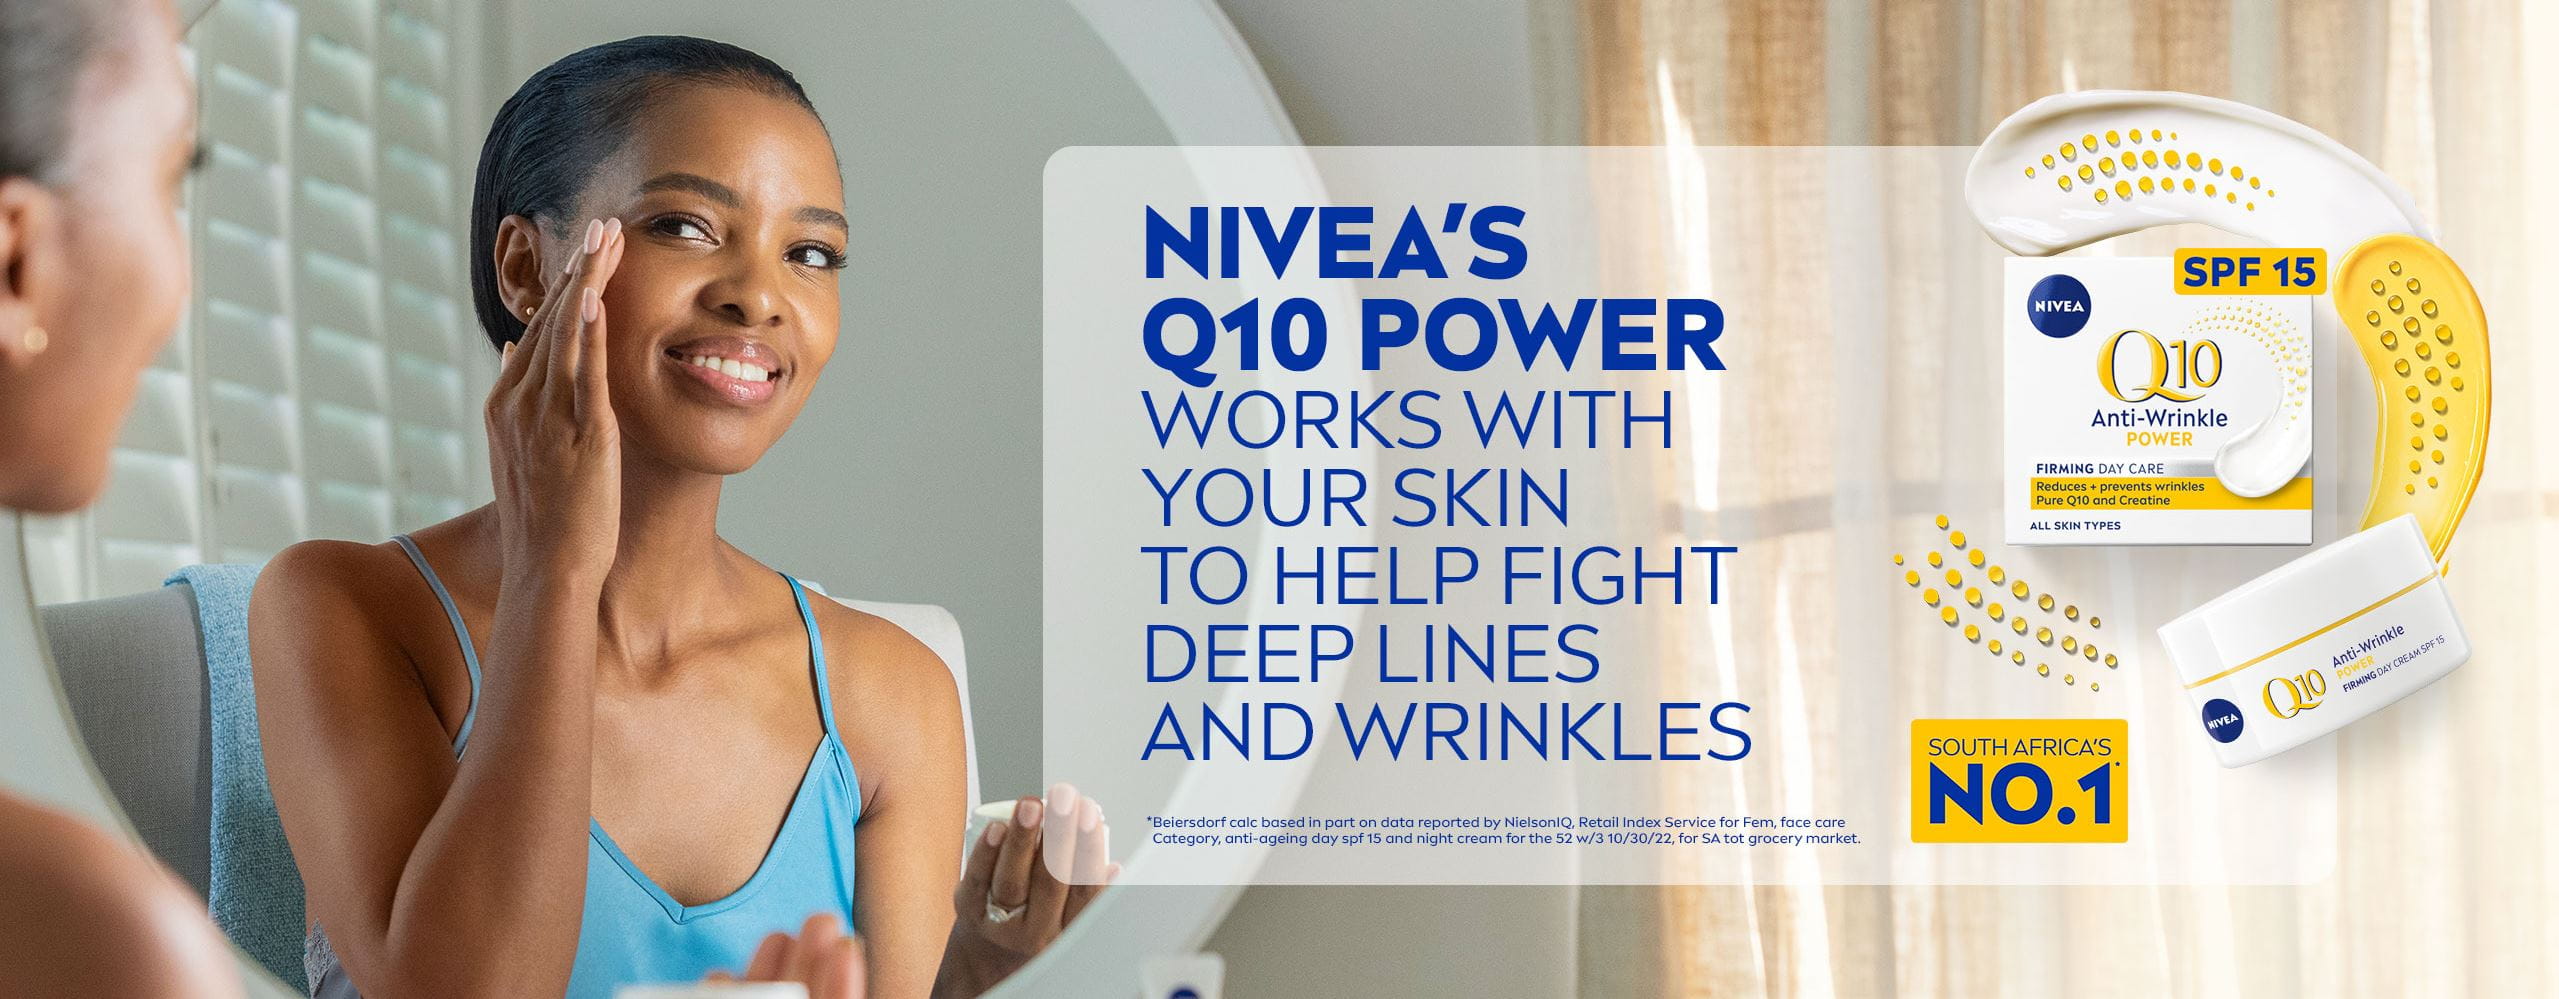 NIVEA Q10 Power works with your skin to help fight deep lines and wrinkles